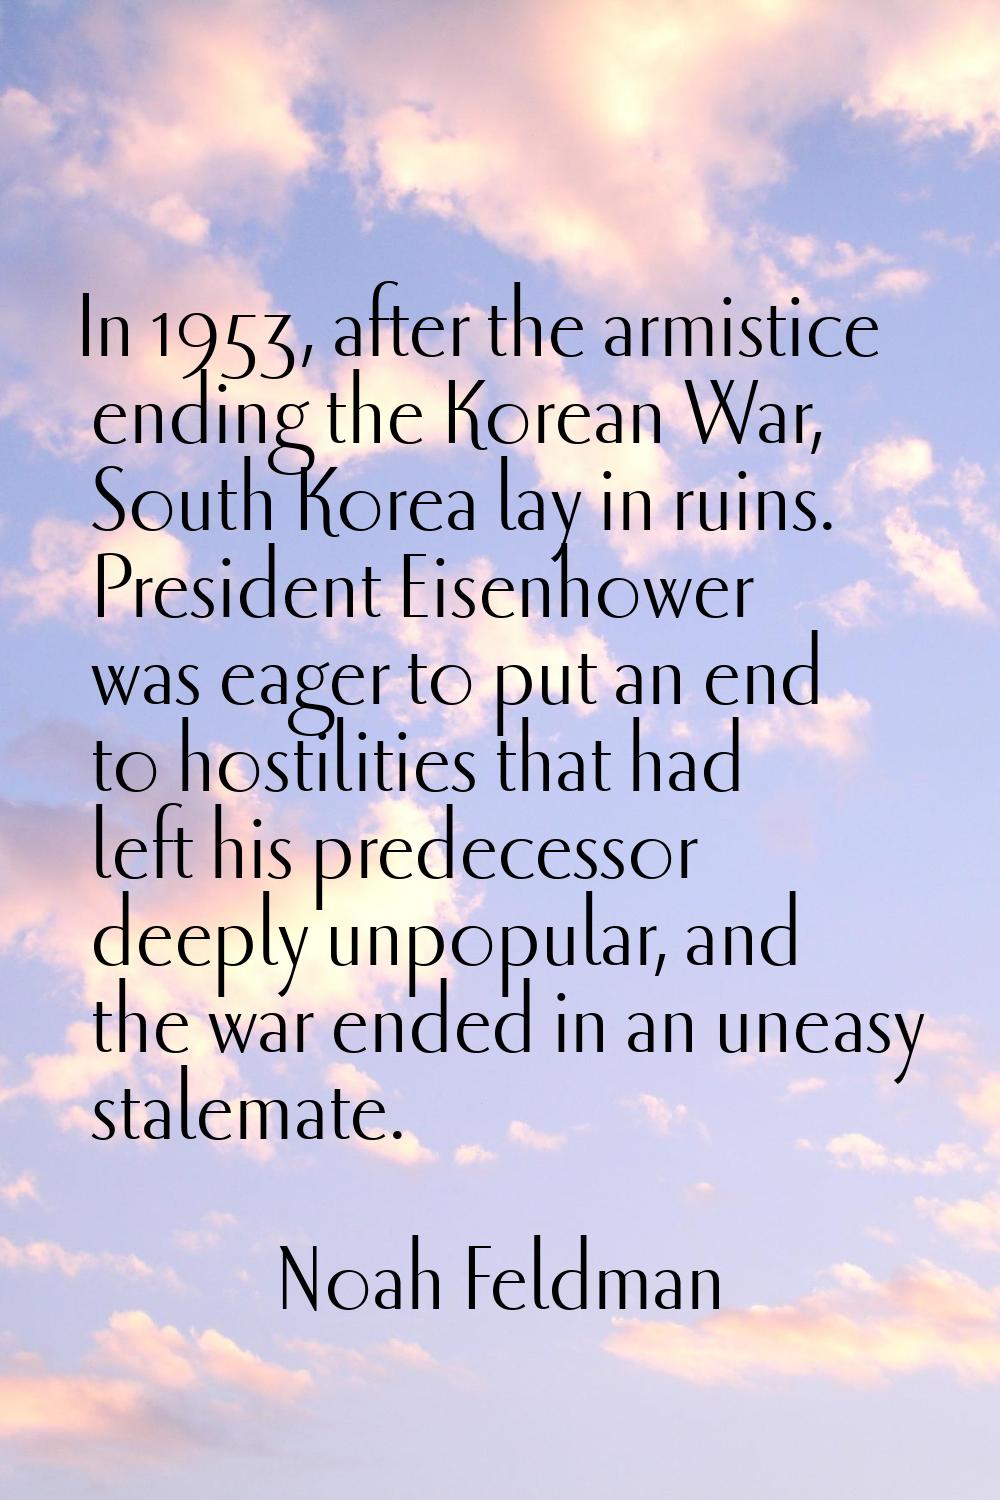 In 1953, after the armistice ending the Korean War, South Korea lay in ruins. President Eisenhower 